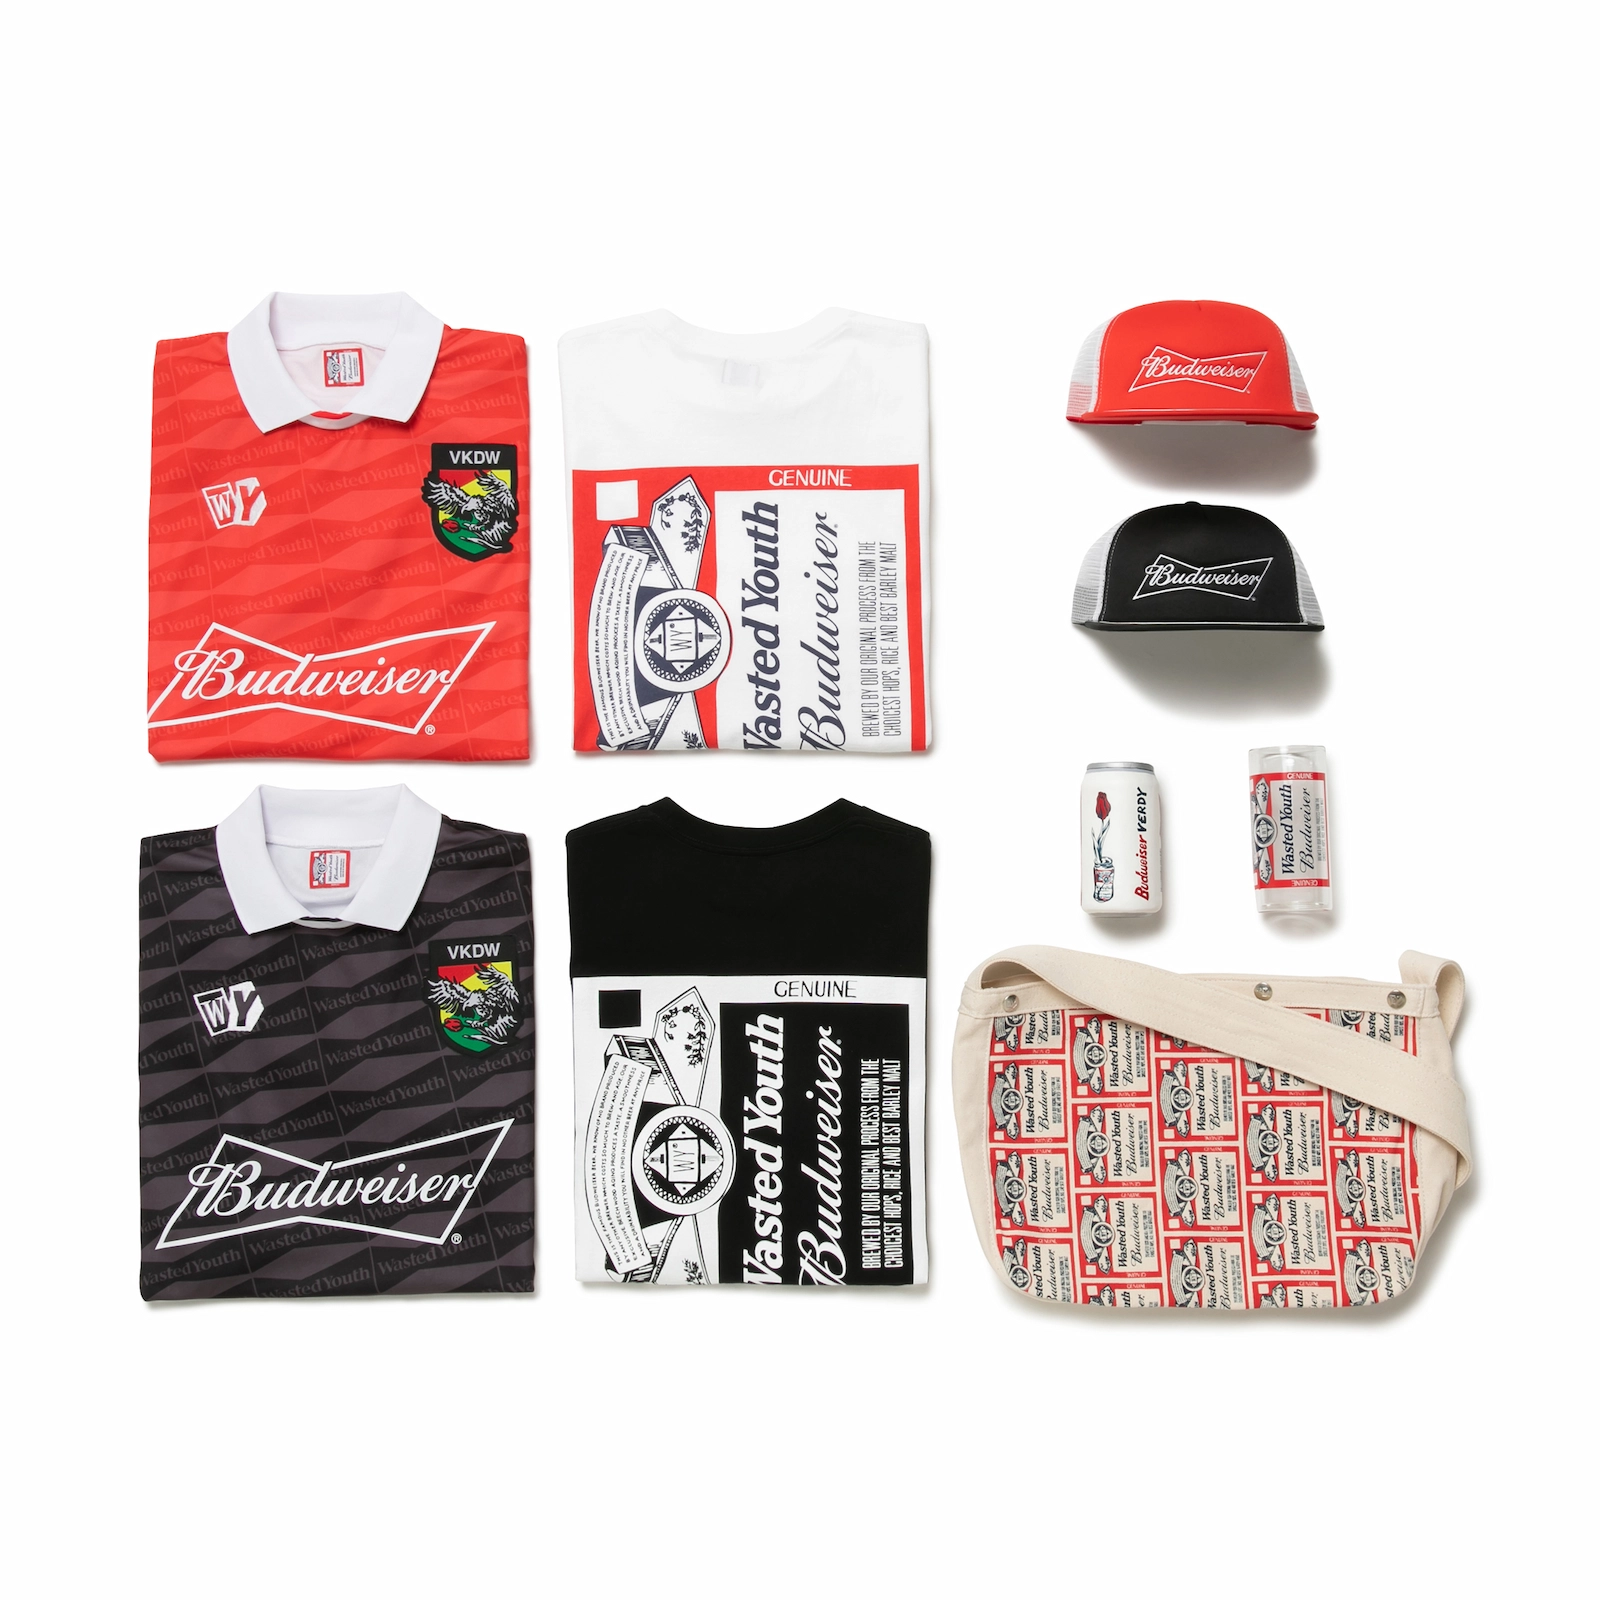 Wasted Youth x Budweiser Collaboration Collection | HUMAN MADE Inc.